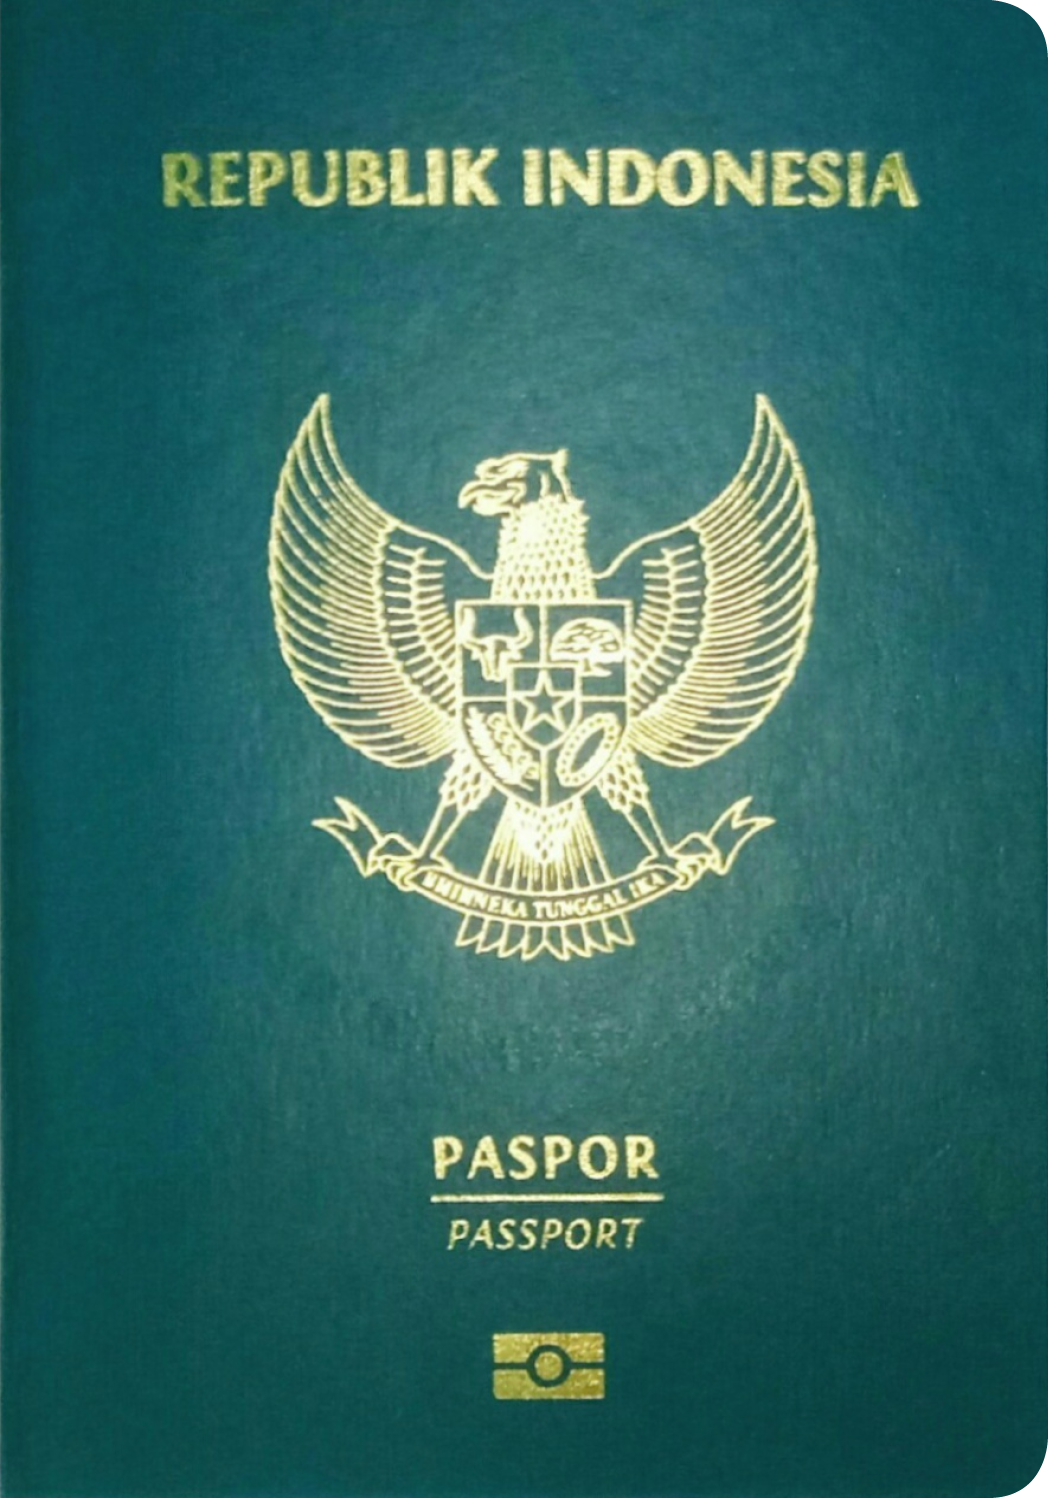 A regular or ordinary Indonesian passport - Front side